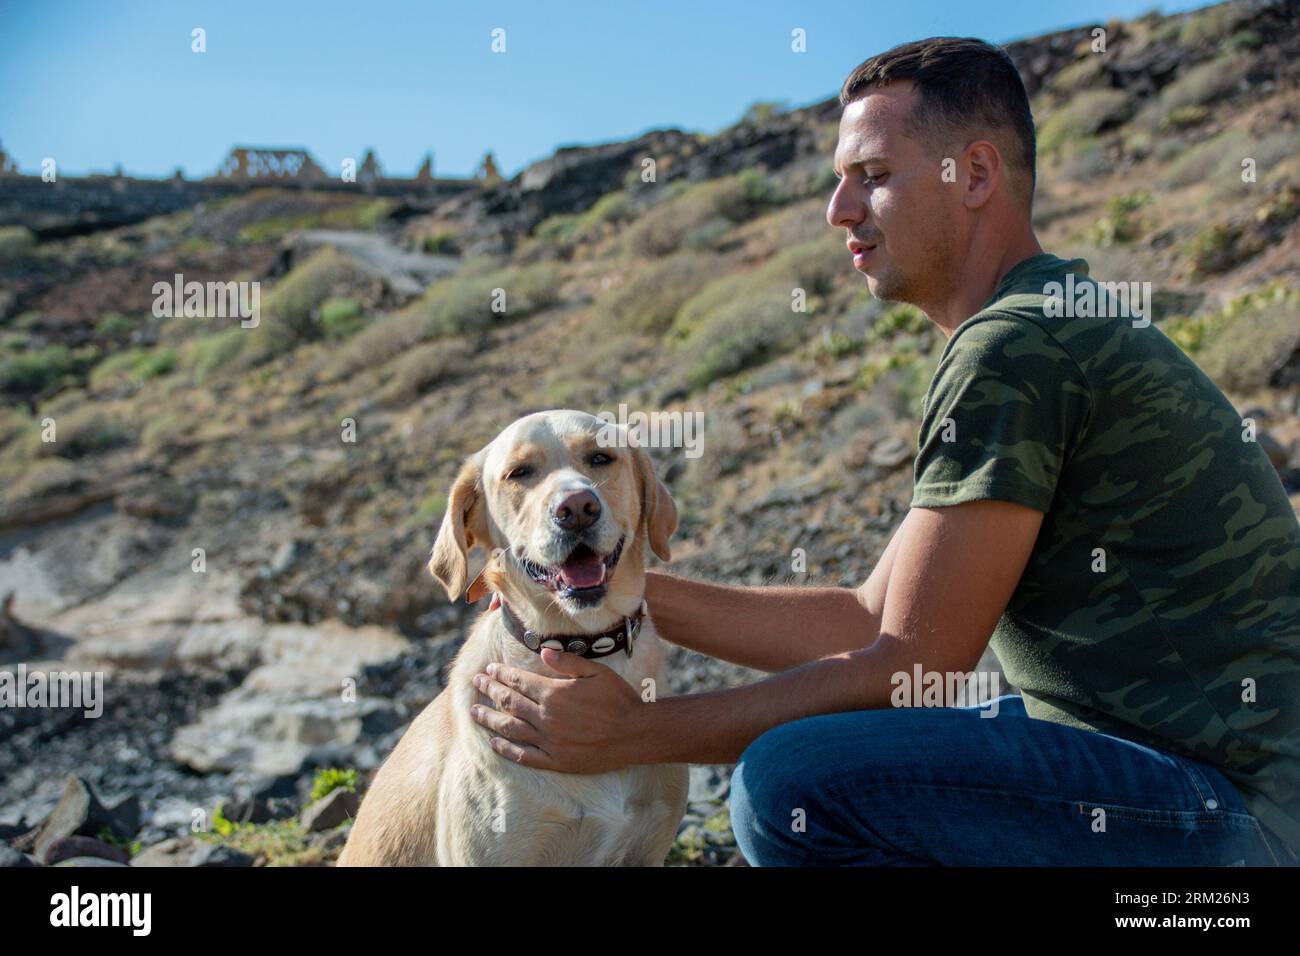 Caucasian dog trainer cuddles labrador dog after successful work session Stock Photo